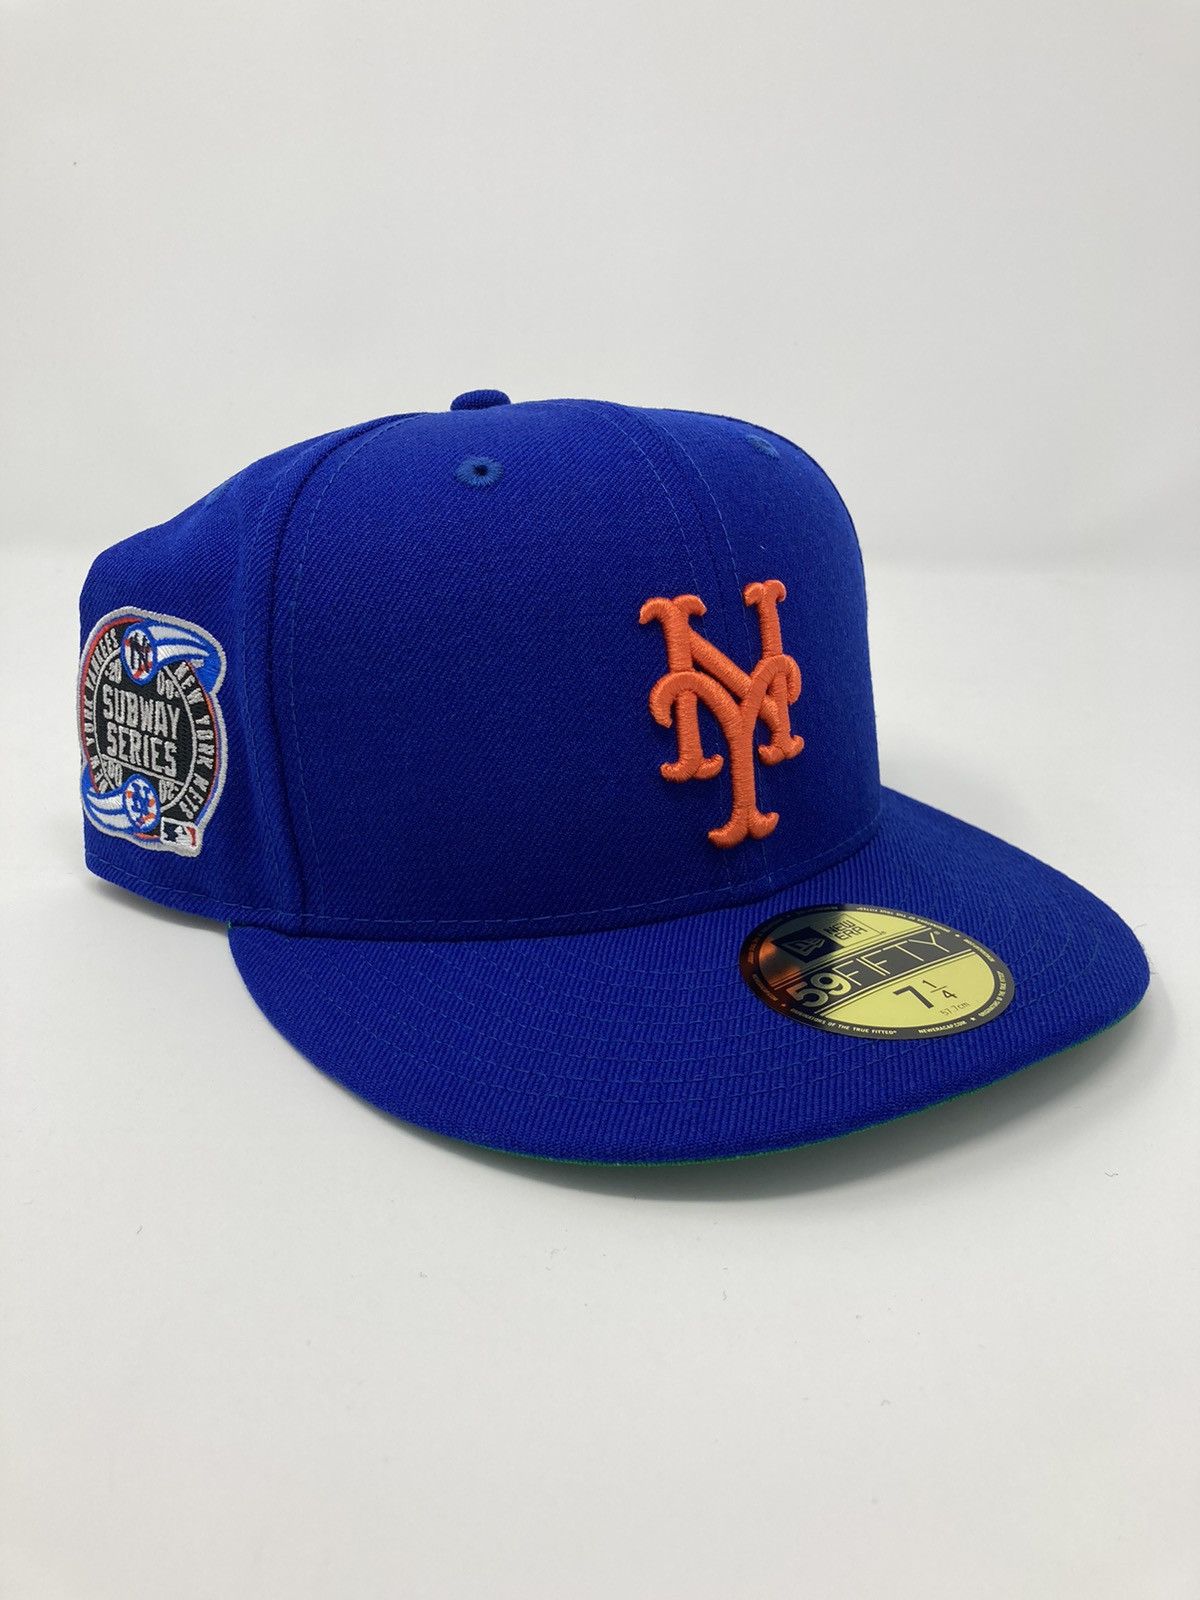 New Era 59Fifty Awake x NY Mets Subway Series Blue Fitted 7 1/4